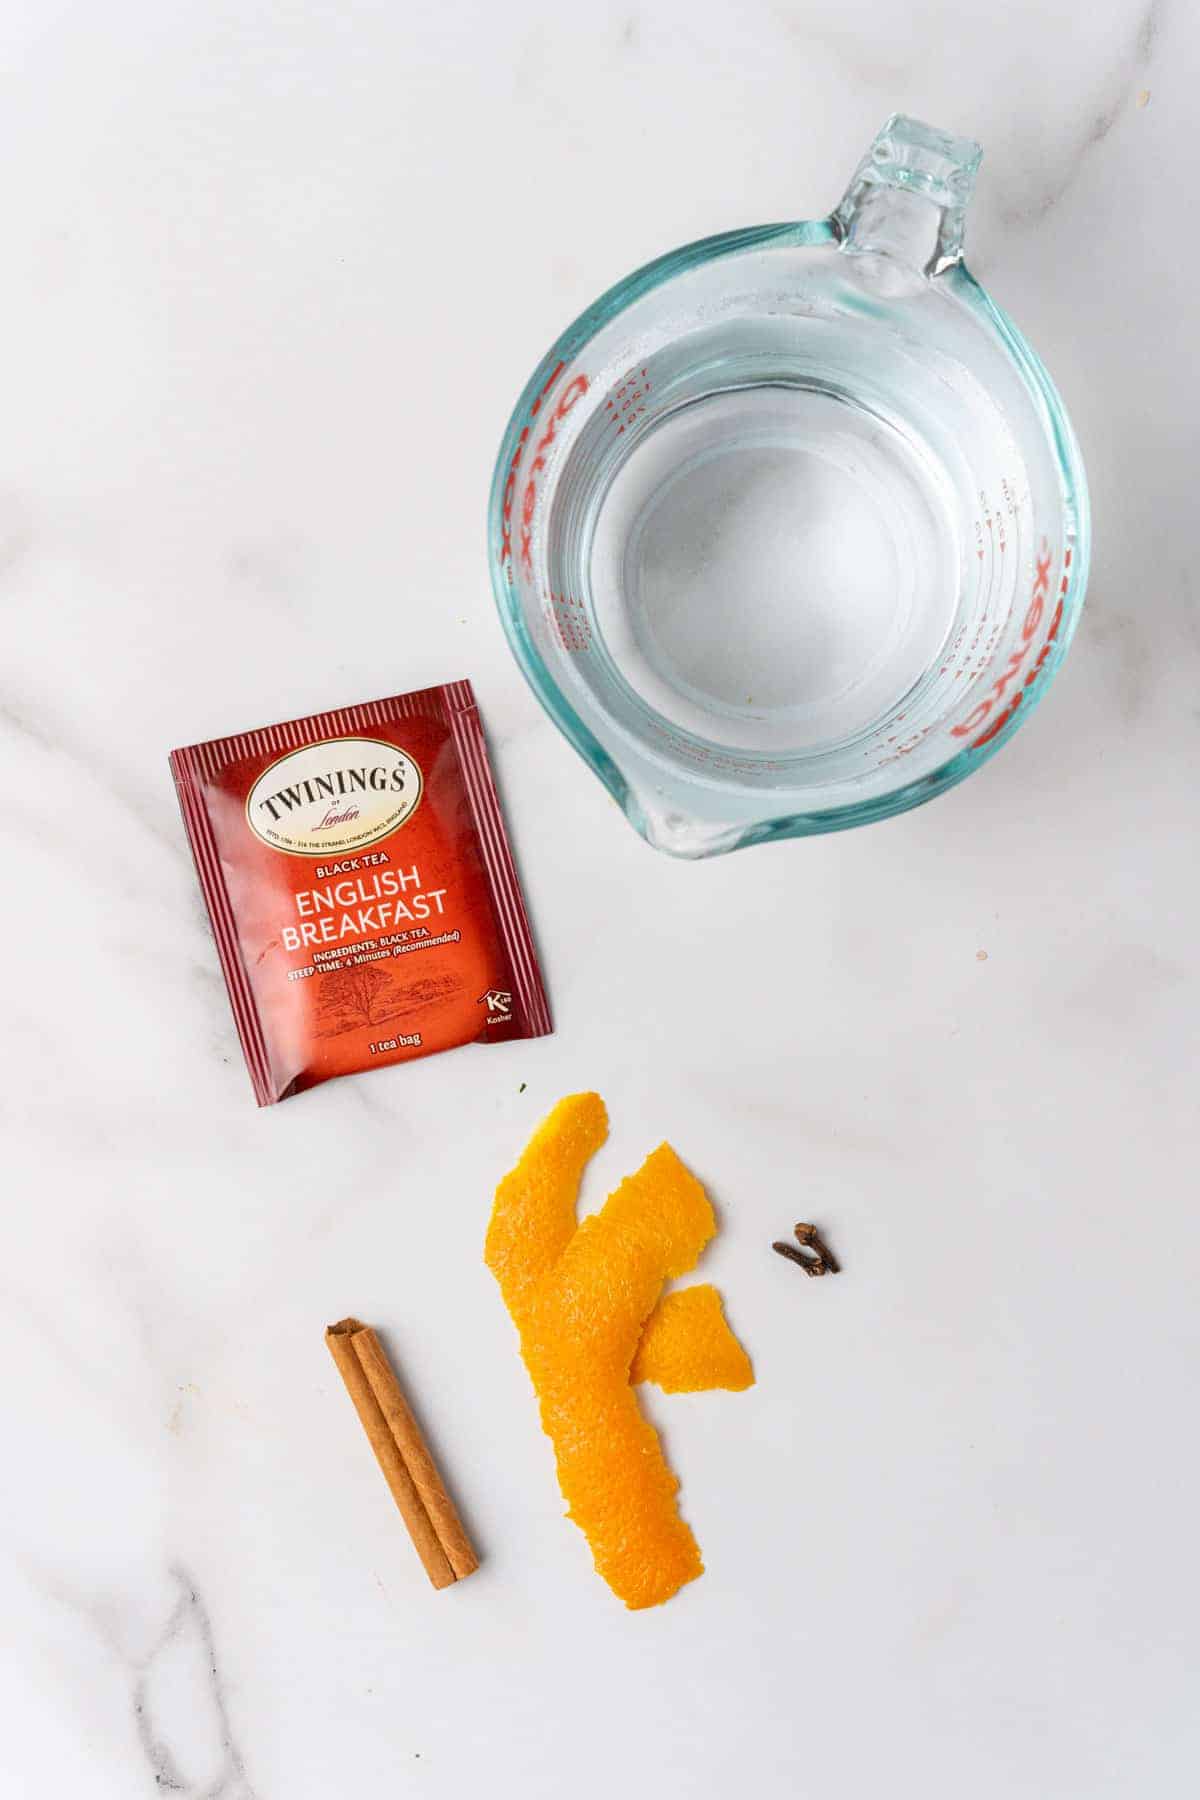 Glass measuring cup, tea bag, cinnamon stick, 2 orange peels, and 2 whole cloves on a white background, as seen from above